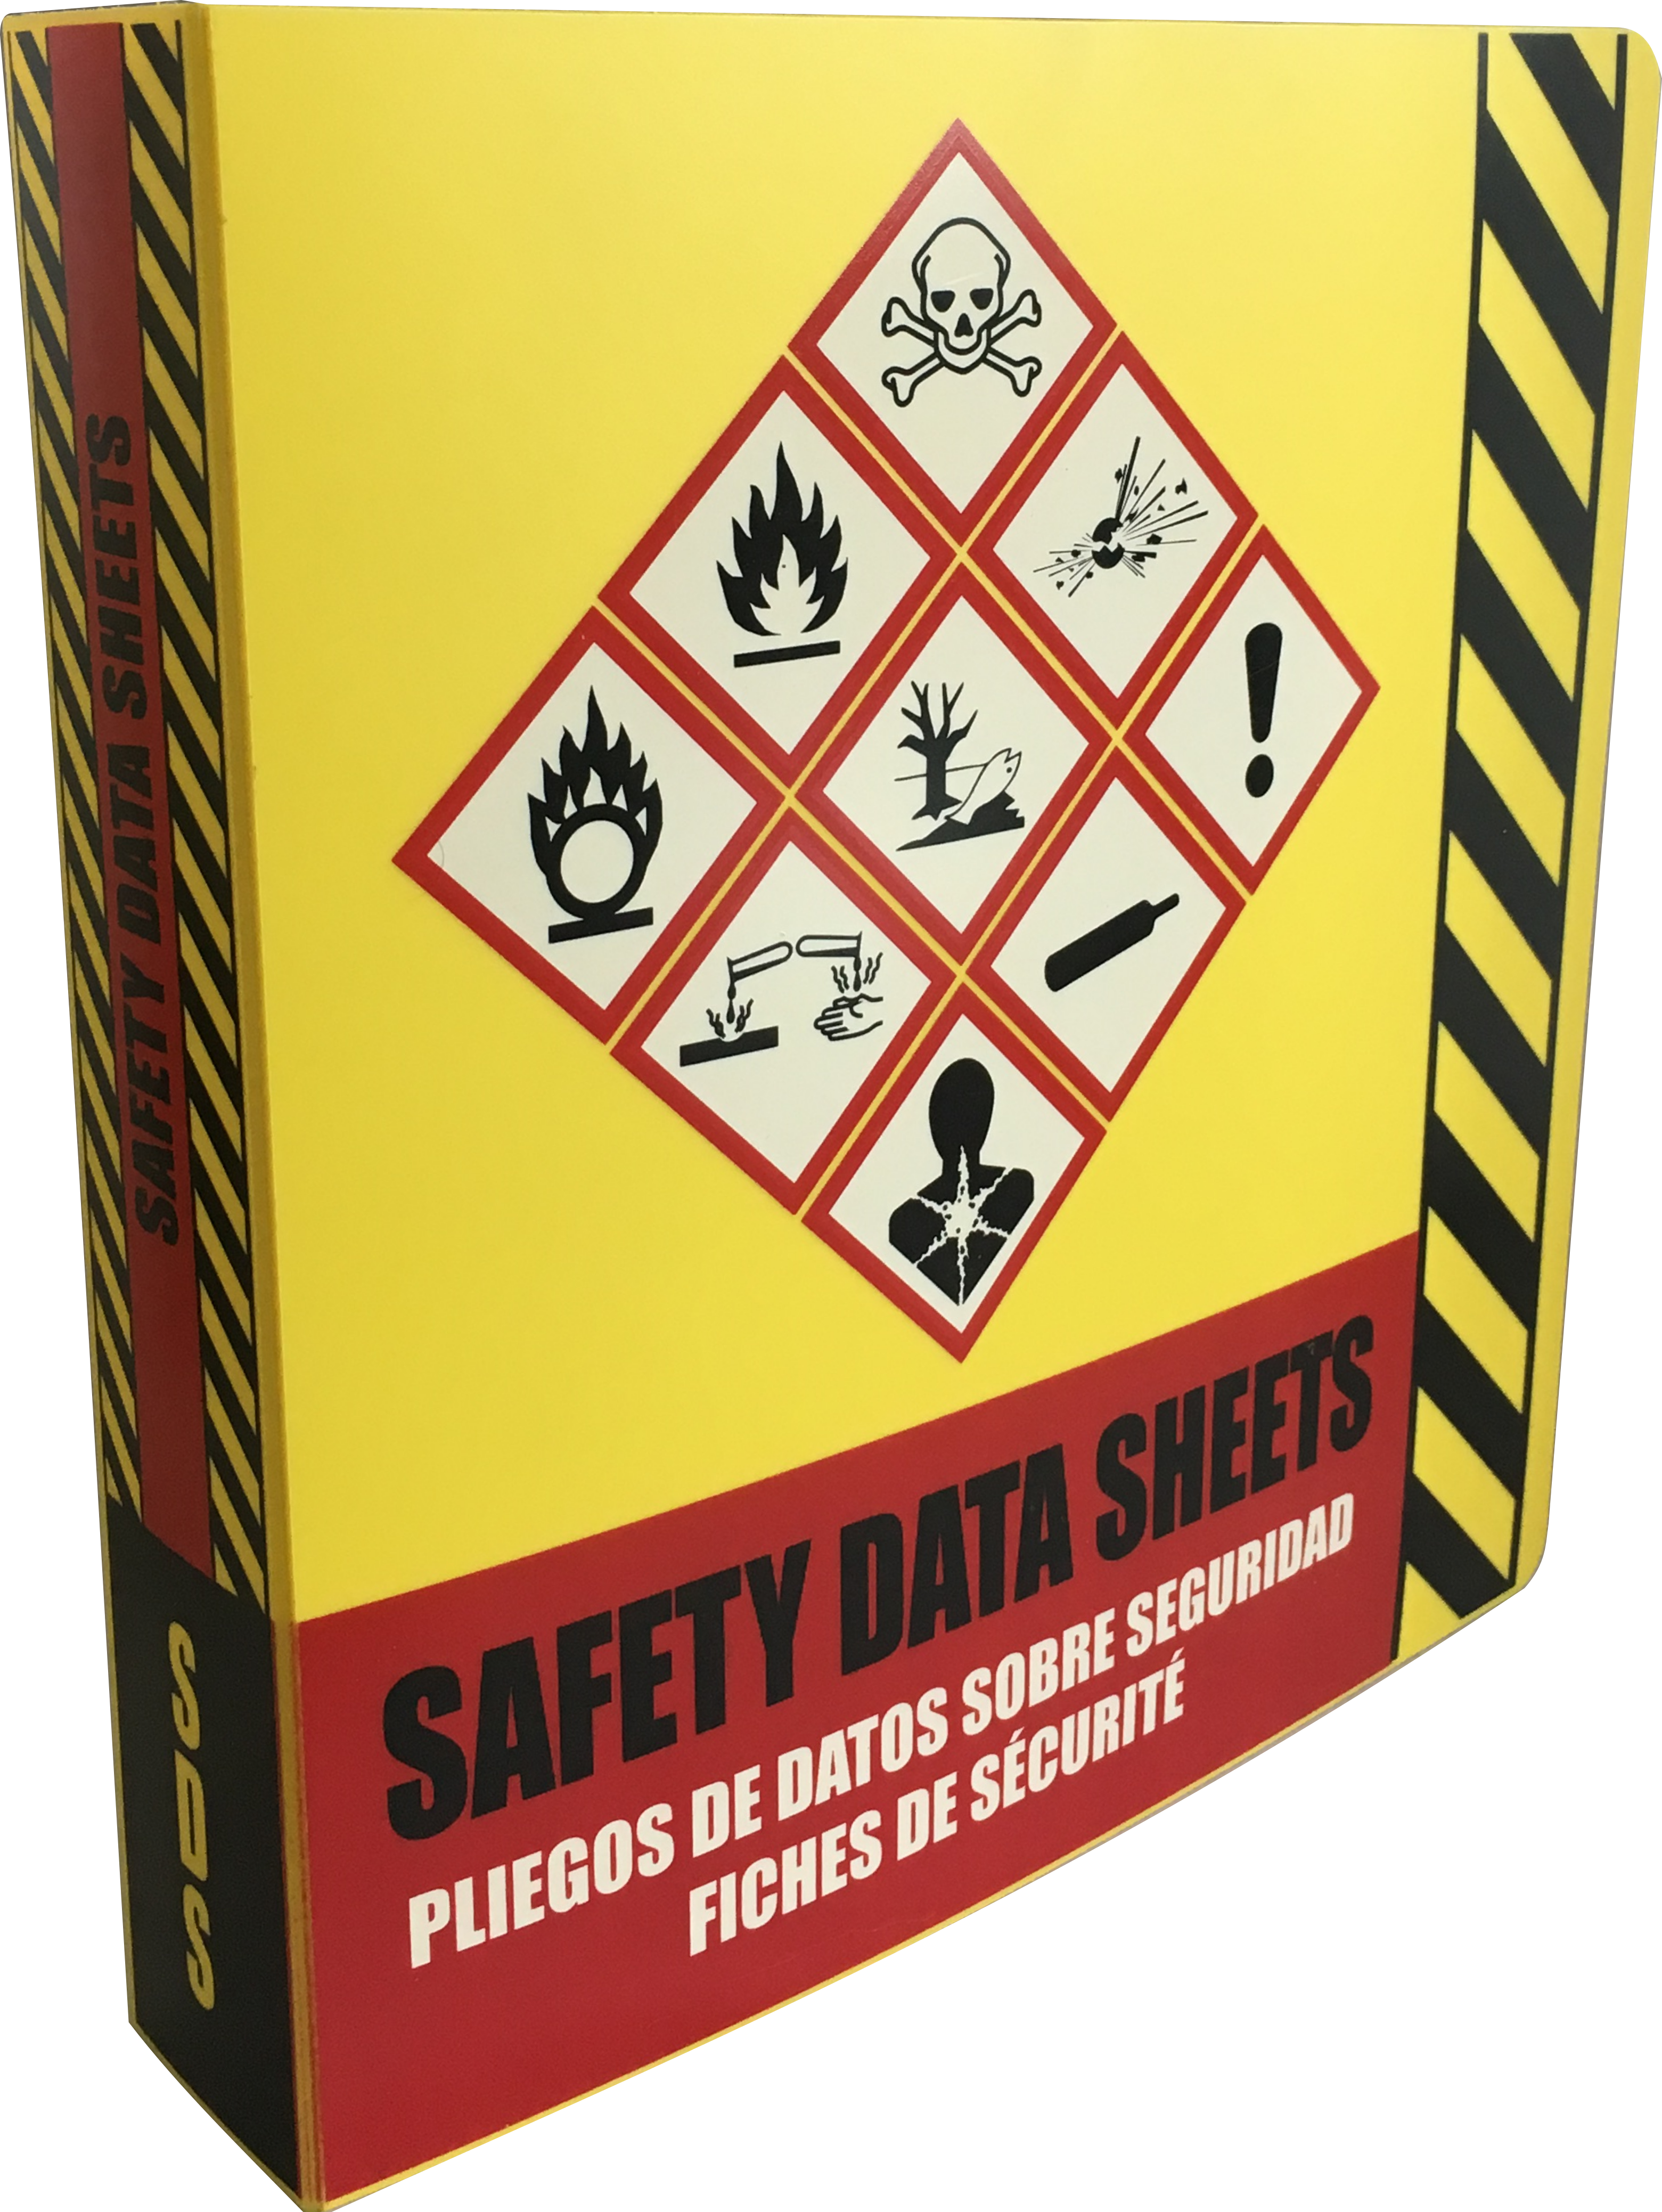 The Essential Handbook of Workplace Safety Signs